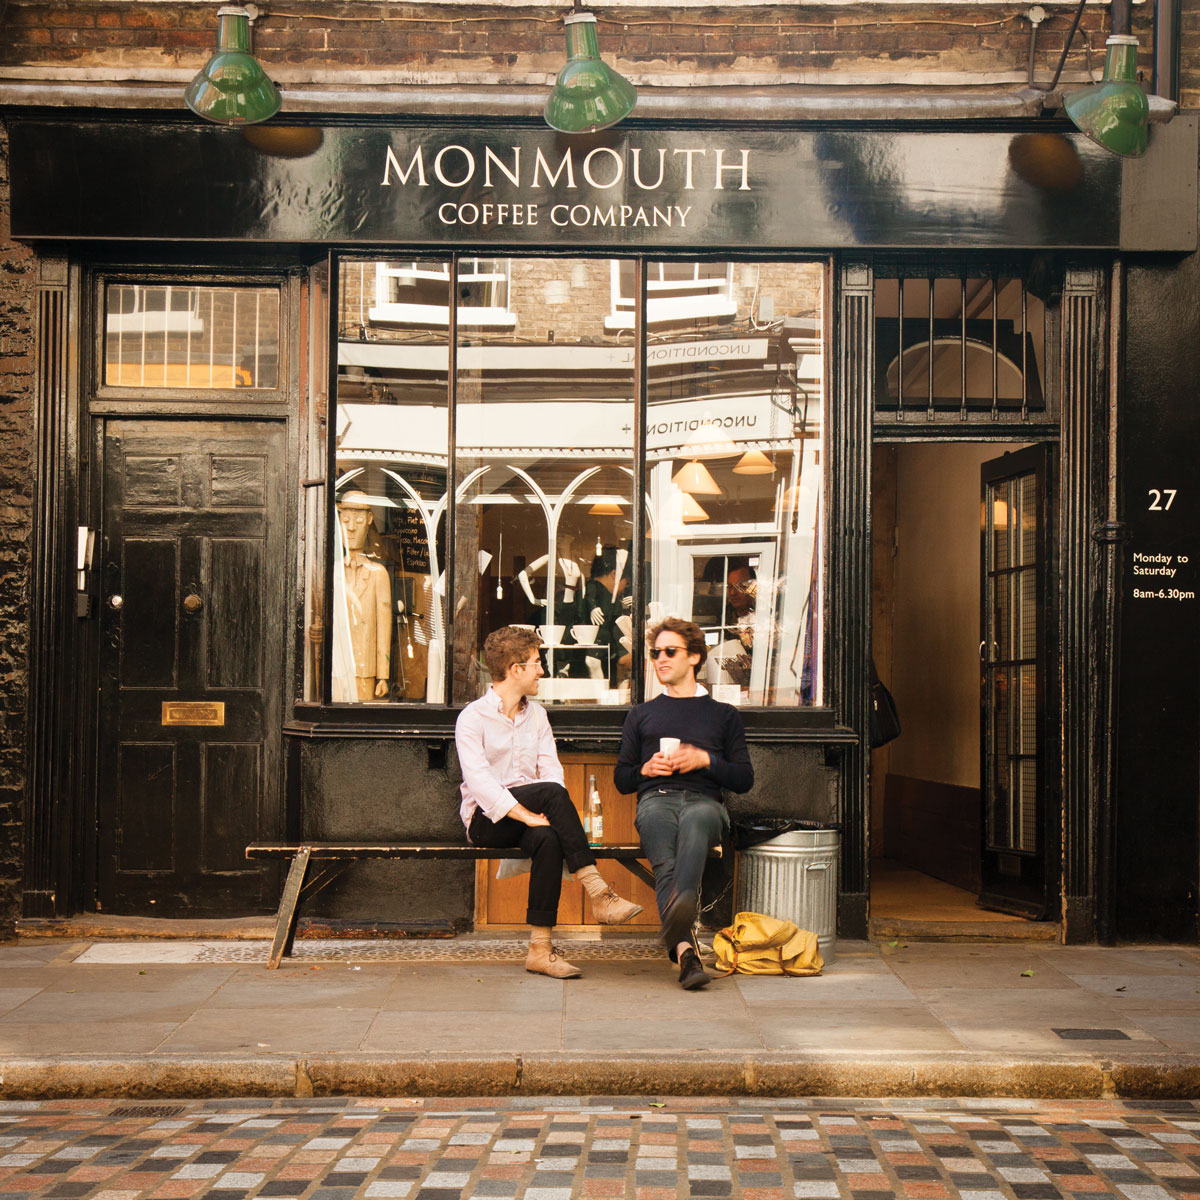 Monmouth’s Café in Covent Garden. While the café serves excellent espresso drinks, the main business is selling bags of whole beans. (Photo: courtesy Monmouth Coffee Company.)